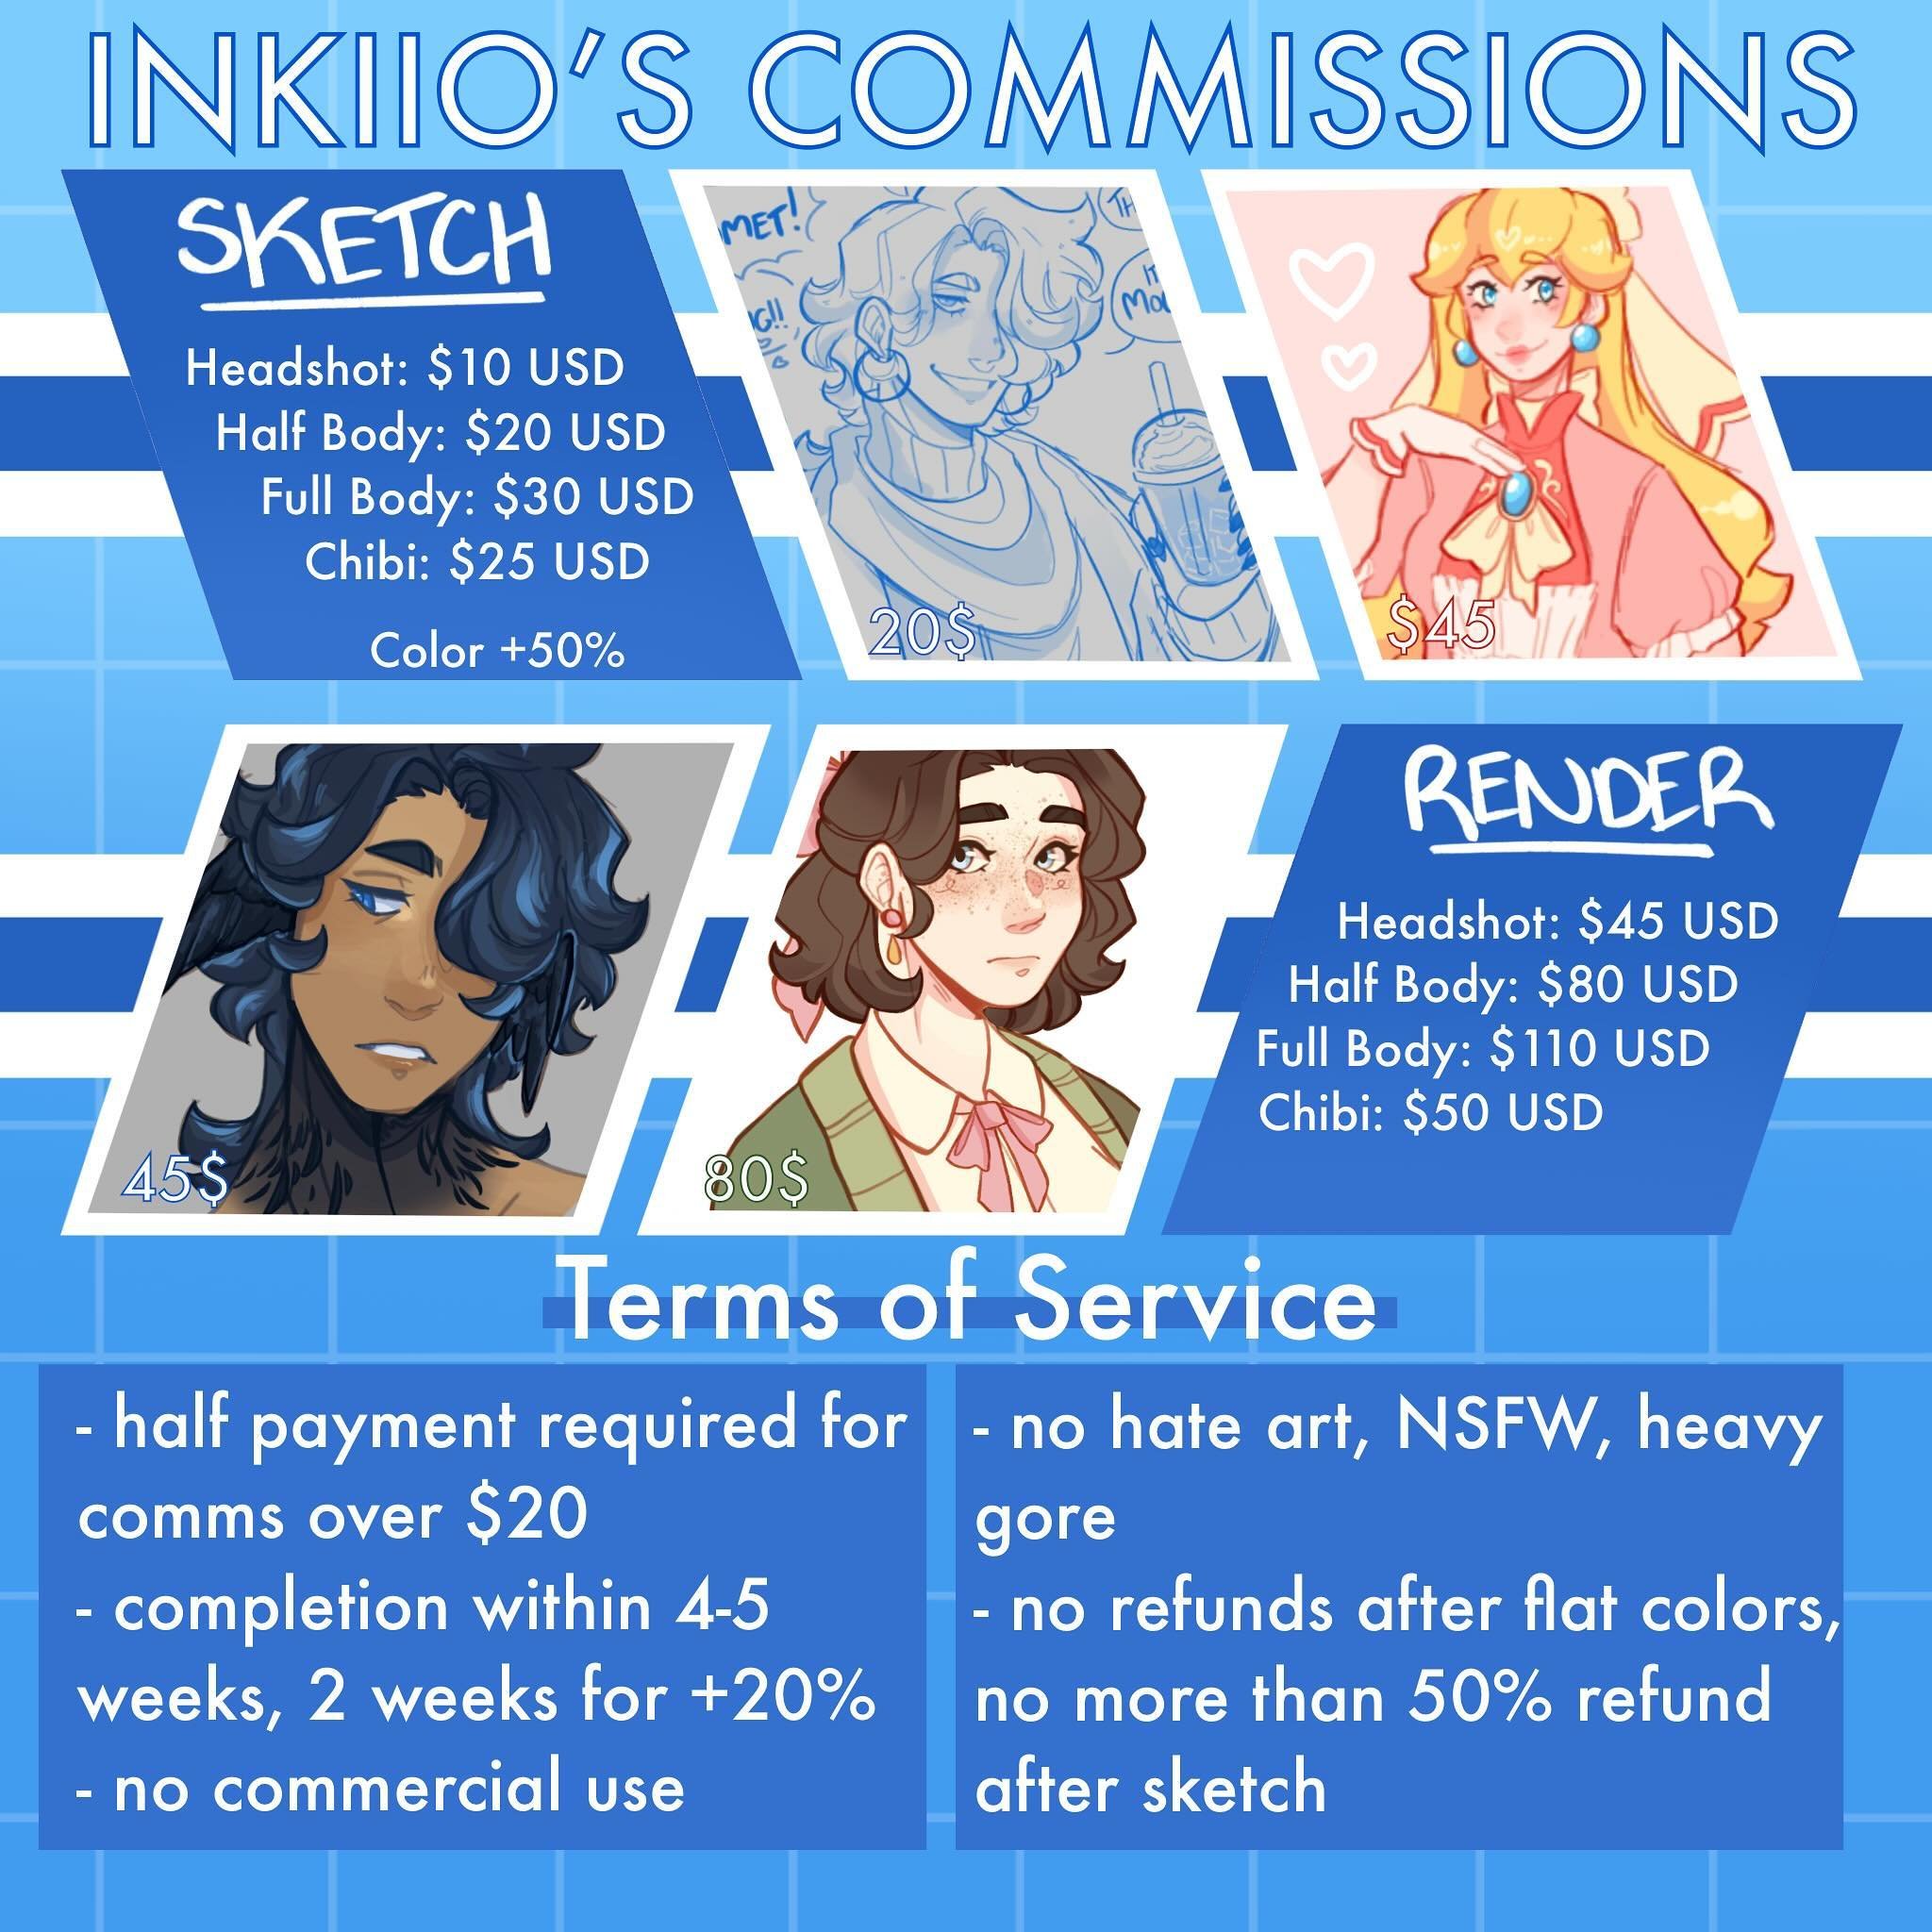 my commissions are open with a new sheet and everything wowwie! dm me if interested or use my new vgen profile to make a request! https://vgen.co/inkiio

5/5 slots are open! paypal, cashapp, and venmo!
-
-
-
-
#inkiio #commissionsopen #commissions #c